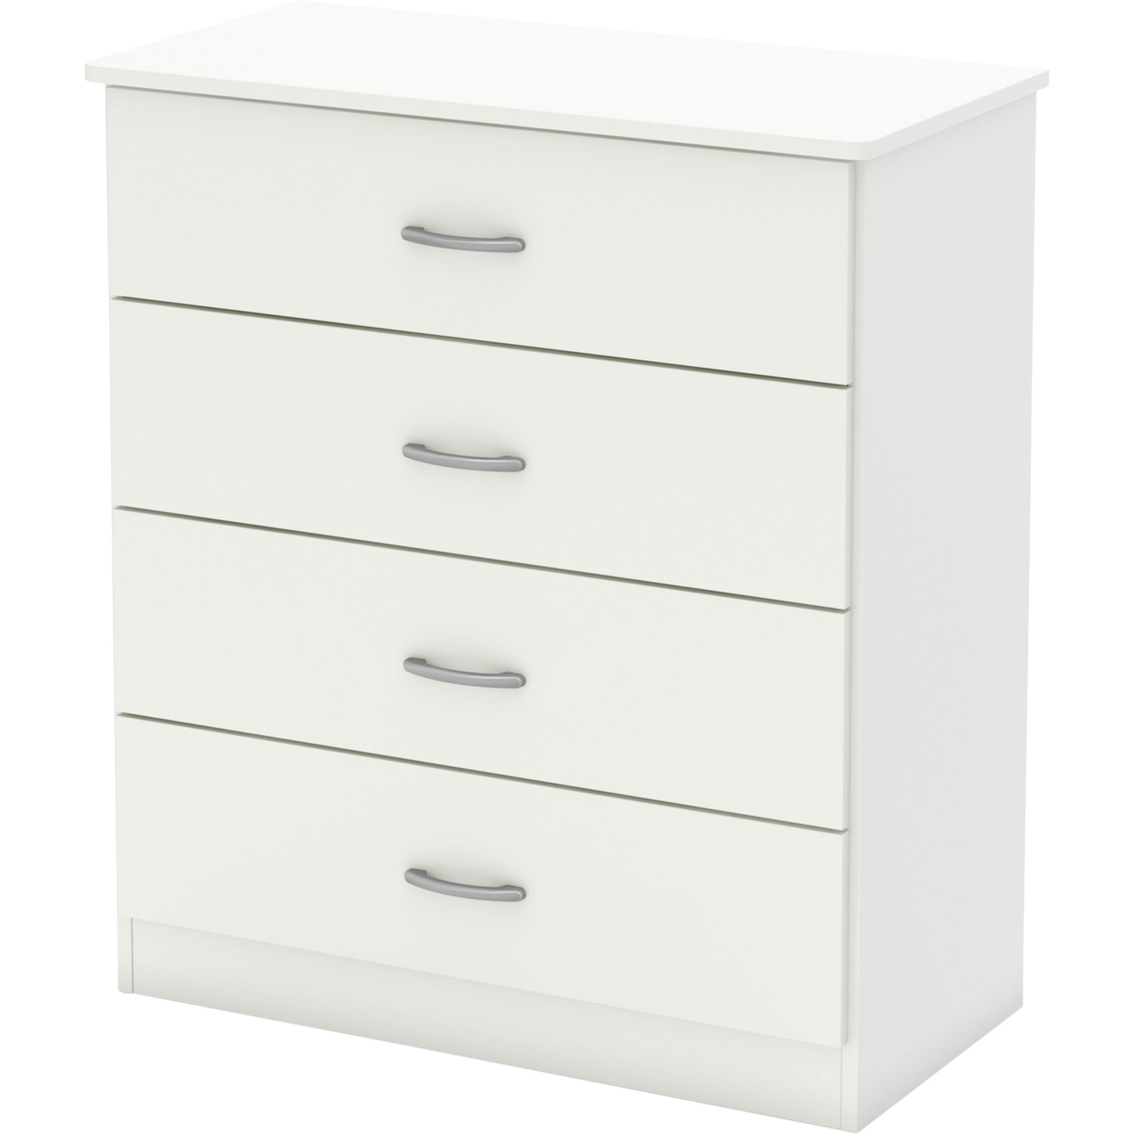 South Shore Libra 4 Drawer Chest Dressers Home Appliances